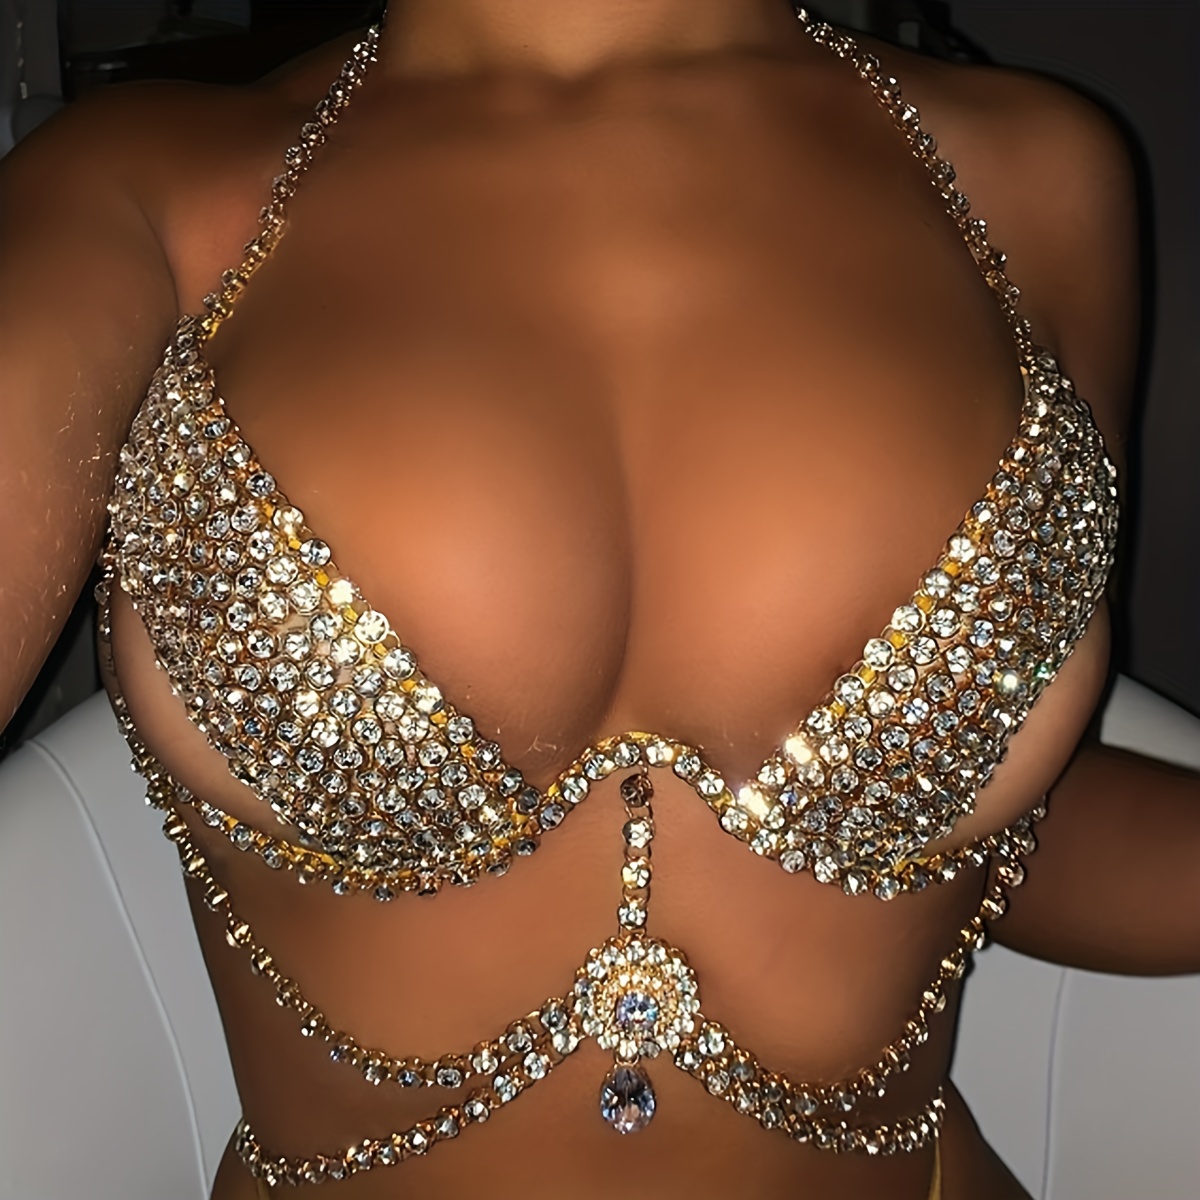 Body Chain Bra, Sexy Cutout Breast Chain, Adjustable Body Jewelry Chain  Halter Neck Backless Festival Outfits for Women and Girls-Silver